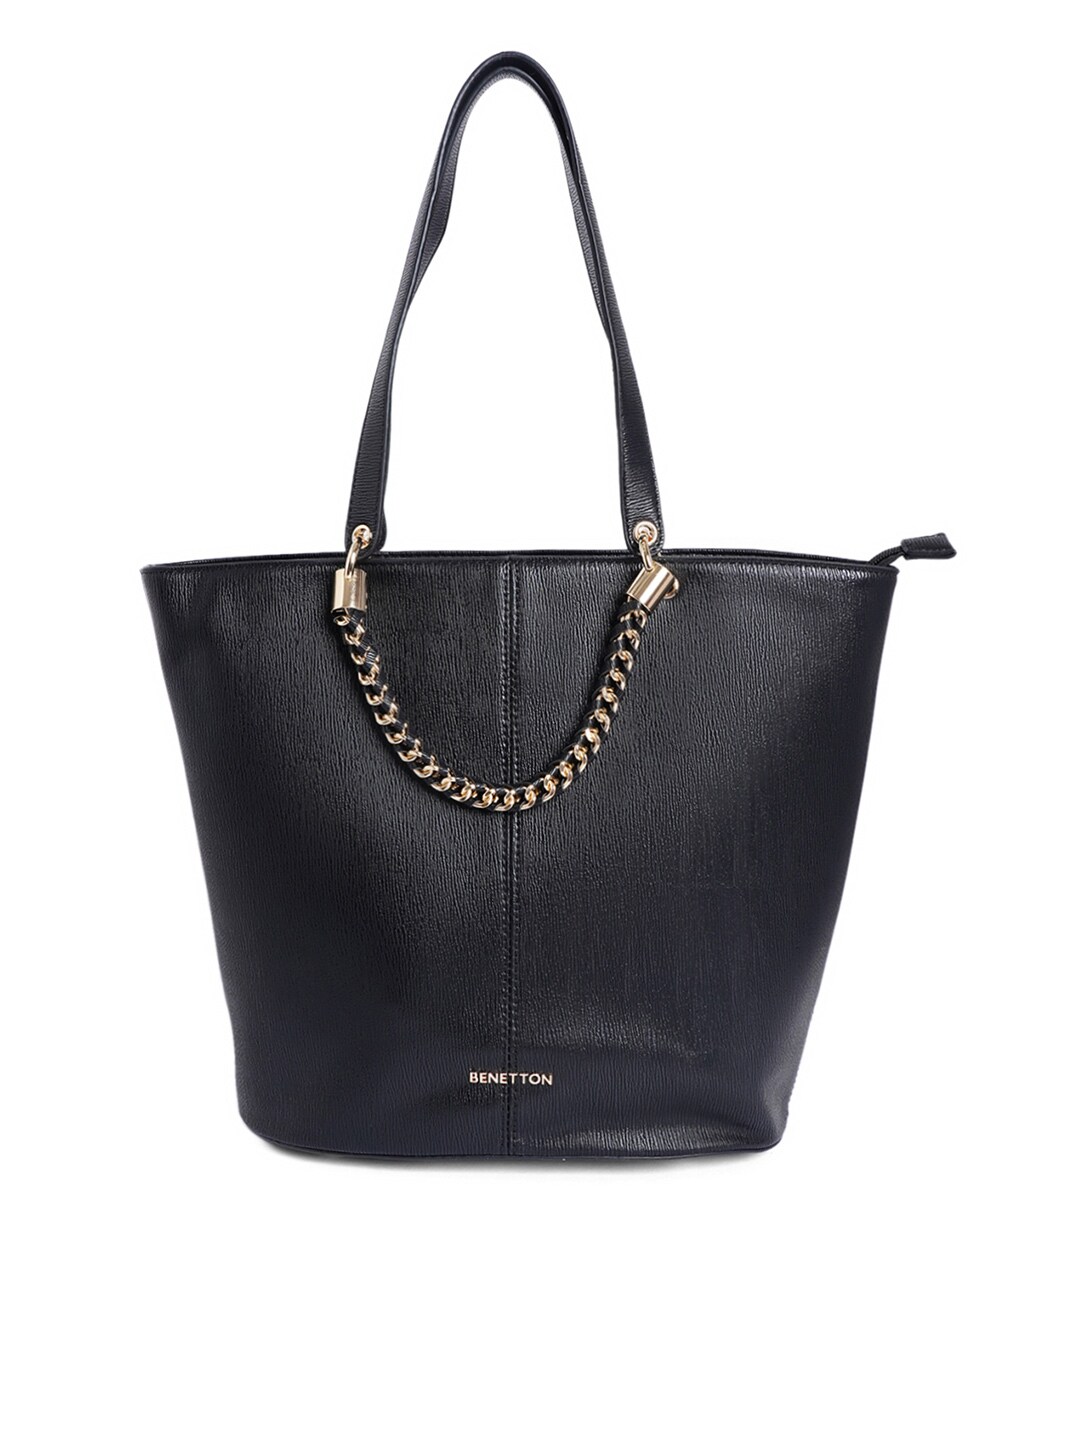 United Colors of Benetton Black Structured Shoulder Bag Price in India